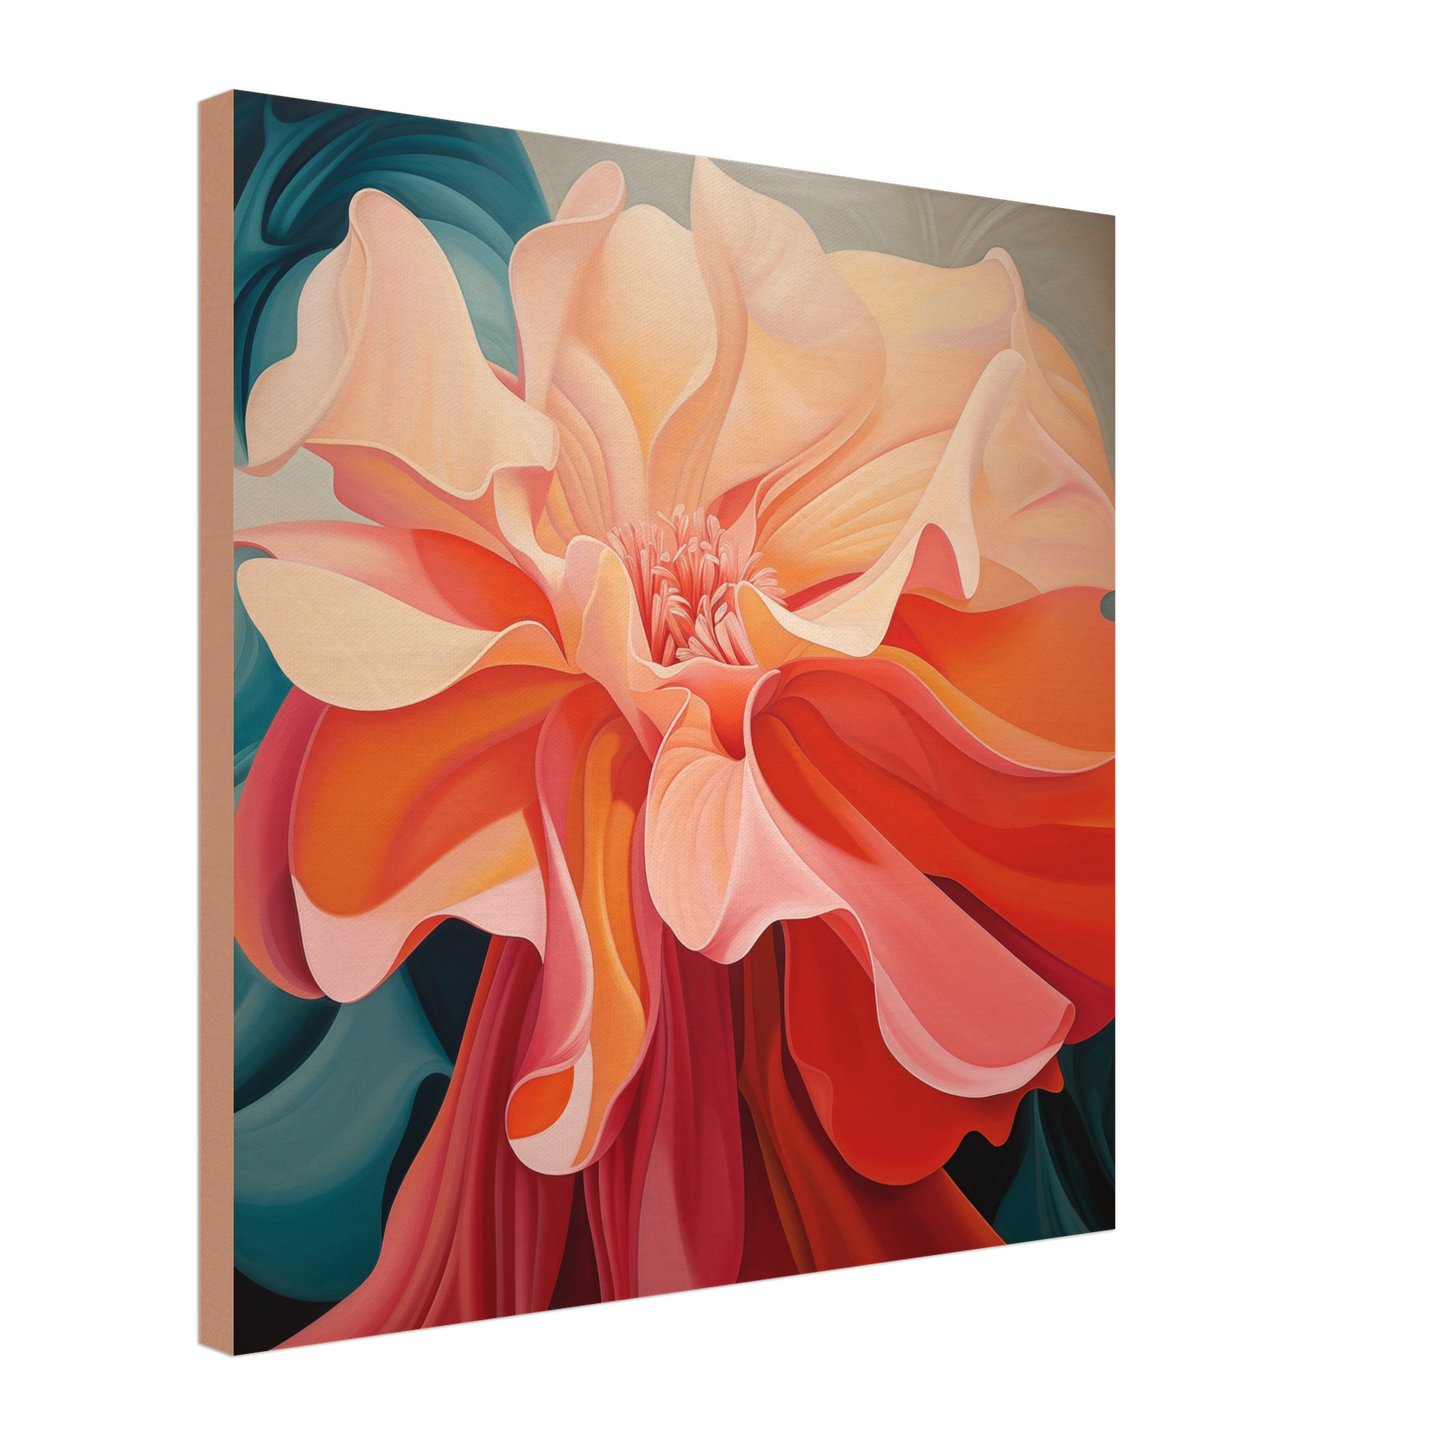 A high-quality The Wild In The Flower Inspired By Georgia O'Keefe - Canvas Print with a textured wooden frame.